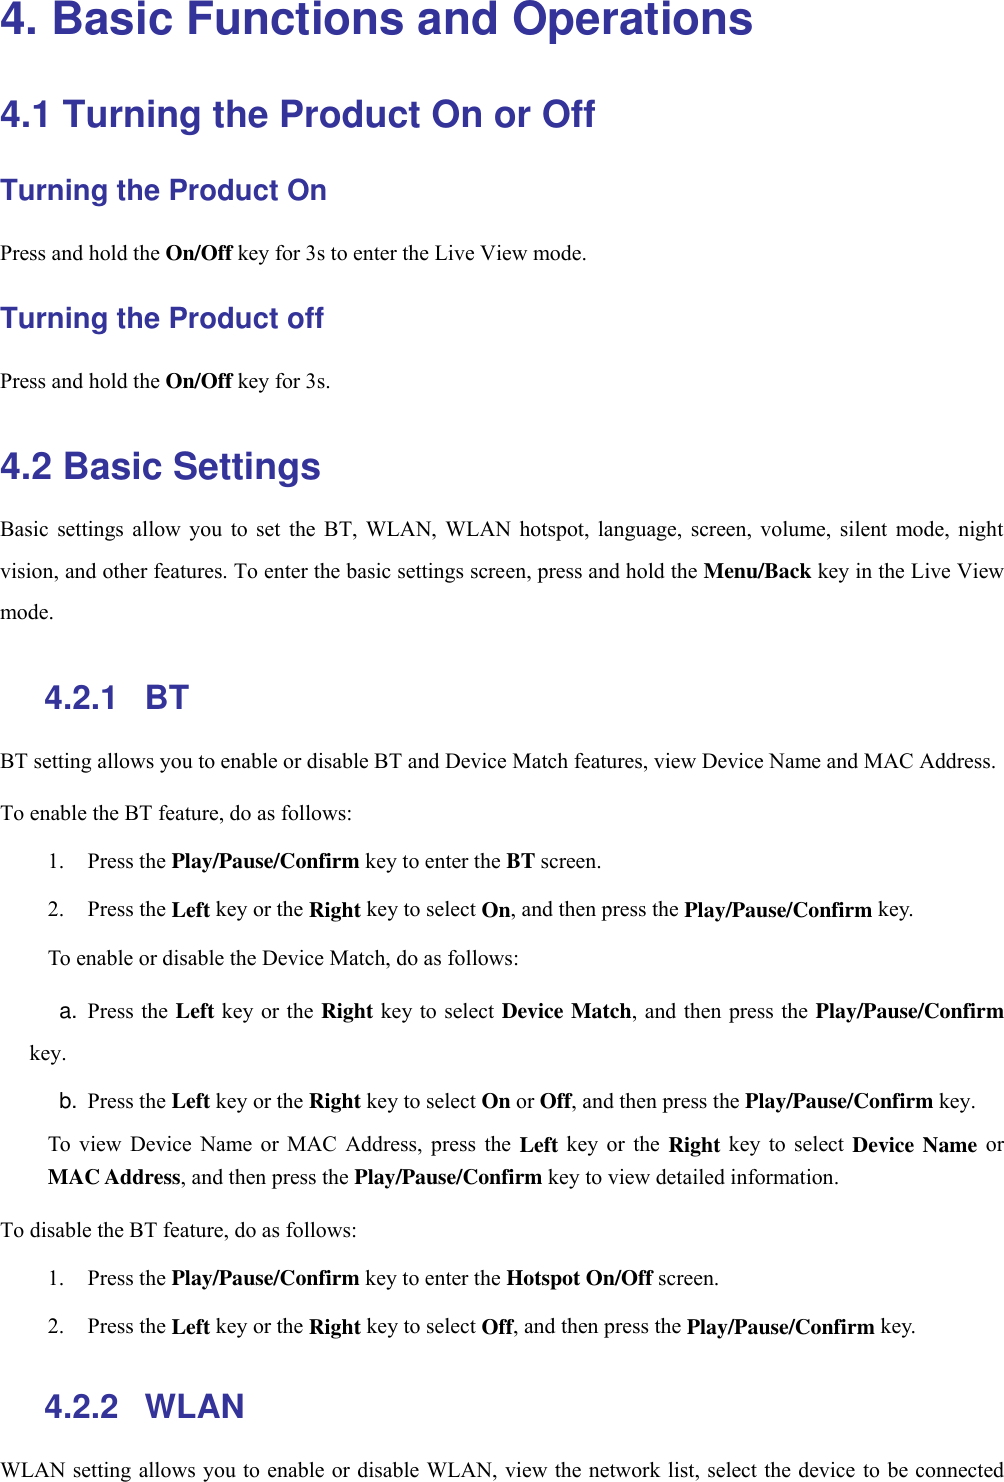  4. Basic Functions and Operations 4.1 Turning the Product On or Off Turning the Product On Press and hold the On/Off key for 3s to enter the Live View mode. Turning the Product off Press and hold the On/Off key for 3s. 4.2 Basic Settings Basic  settings  allow  you  to  set  the  BT,  WLAN,  WLAN  hotspot,  language,  screen,  volume,  silent  mode,  night vision, and other features. To enter the basic settings screen, press and hold the Menu/Back key in the Live View mode. 4.2.1   BT BT setting allows you to enable or disable BT and Device Match features, view Device Name and MAC Address. To enable the BT feature, do as follows: 1. Press the Play/Pause/Confirm key to enter the BT screen. 2. Press the Left key or the Right key to select On, and then press the Play/Pause/Confirm key. To enable or disable the Device Match, do as follows: a. Press the Left key or the Right key to select  Device Match, and then press the Play/Pause/Confirm key. b. Press the Left key or the Right key to select On or Off, and then press the Play/Pause/Confirm key. To  view  Device  Name  or  MAC  Address,  press  the  Left  key  or  the  Right  key  to  select  Device Name or MAC Address, and then press the Play/Pause/Confirm key to view detailed information. To disable the BT feature, do as follows: 1. Press the Play/Pause/Confirm key to enter the Hotspot On/Off screen. 2. Press the Left key or the Right key to select Off, and then press the Play/Pause/Confirm key. 4.2.2   WLAN WLAN setting allows you to enable or disable WLAN, view the network list, select the device to be connected 